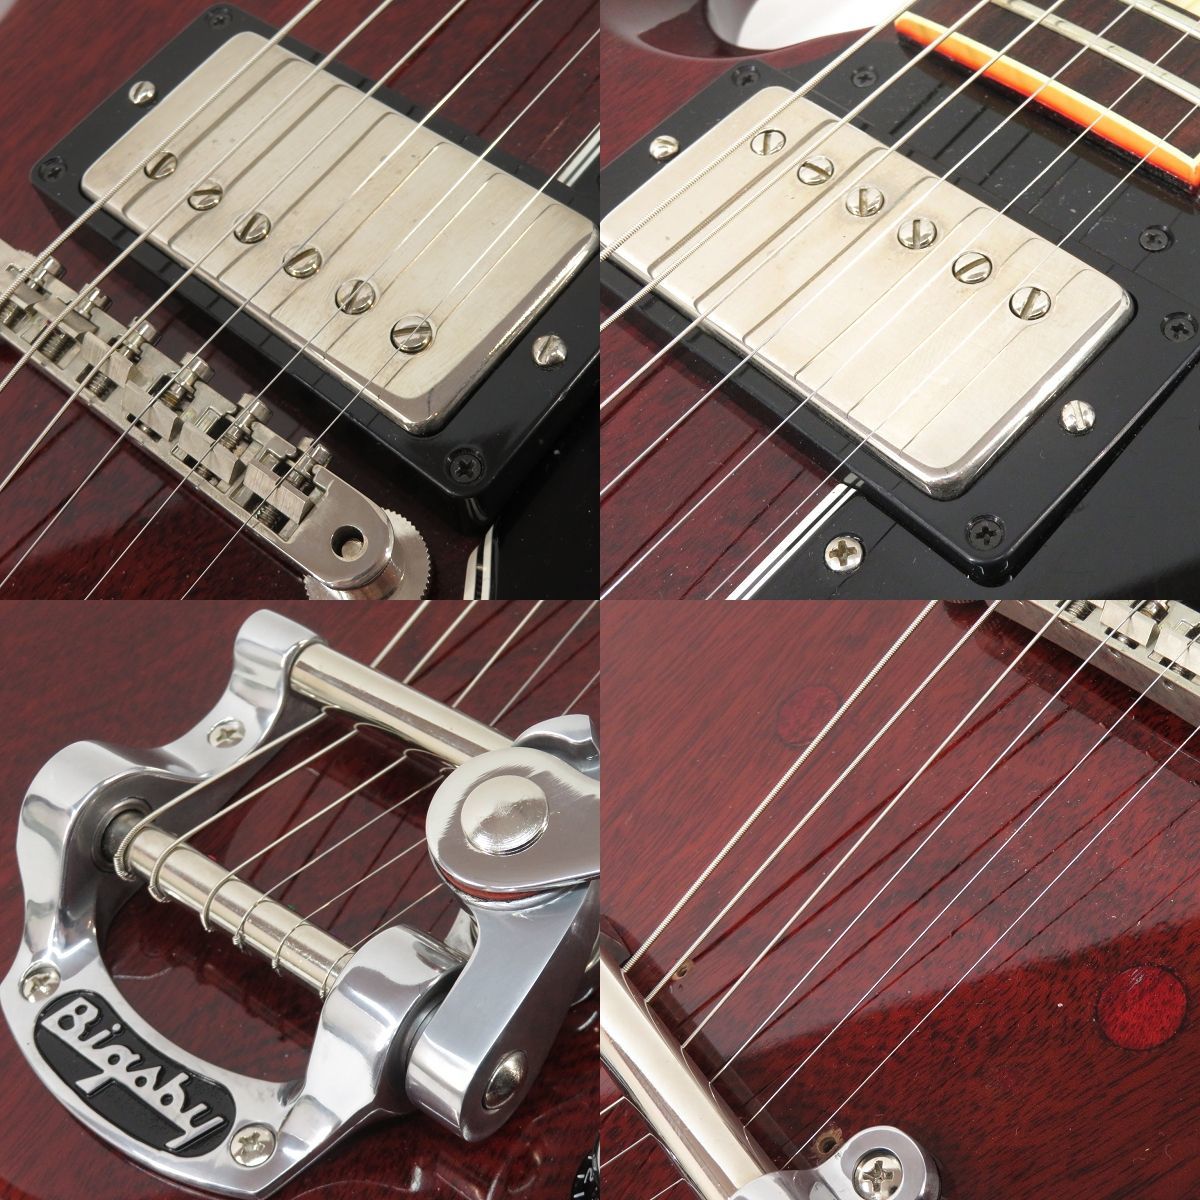 092s☆Gibson ギブソン Historic Collection 1961 SG Standard Reissue Mod チェリー 2000年製 エレキギター ※中古_画像4